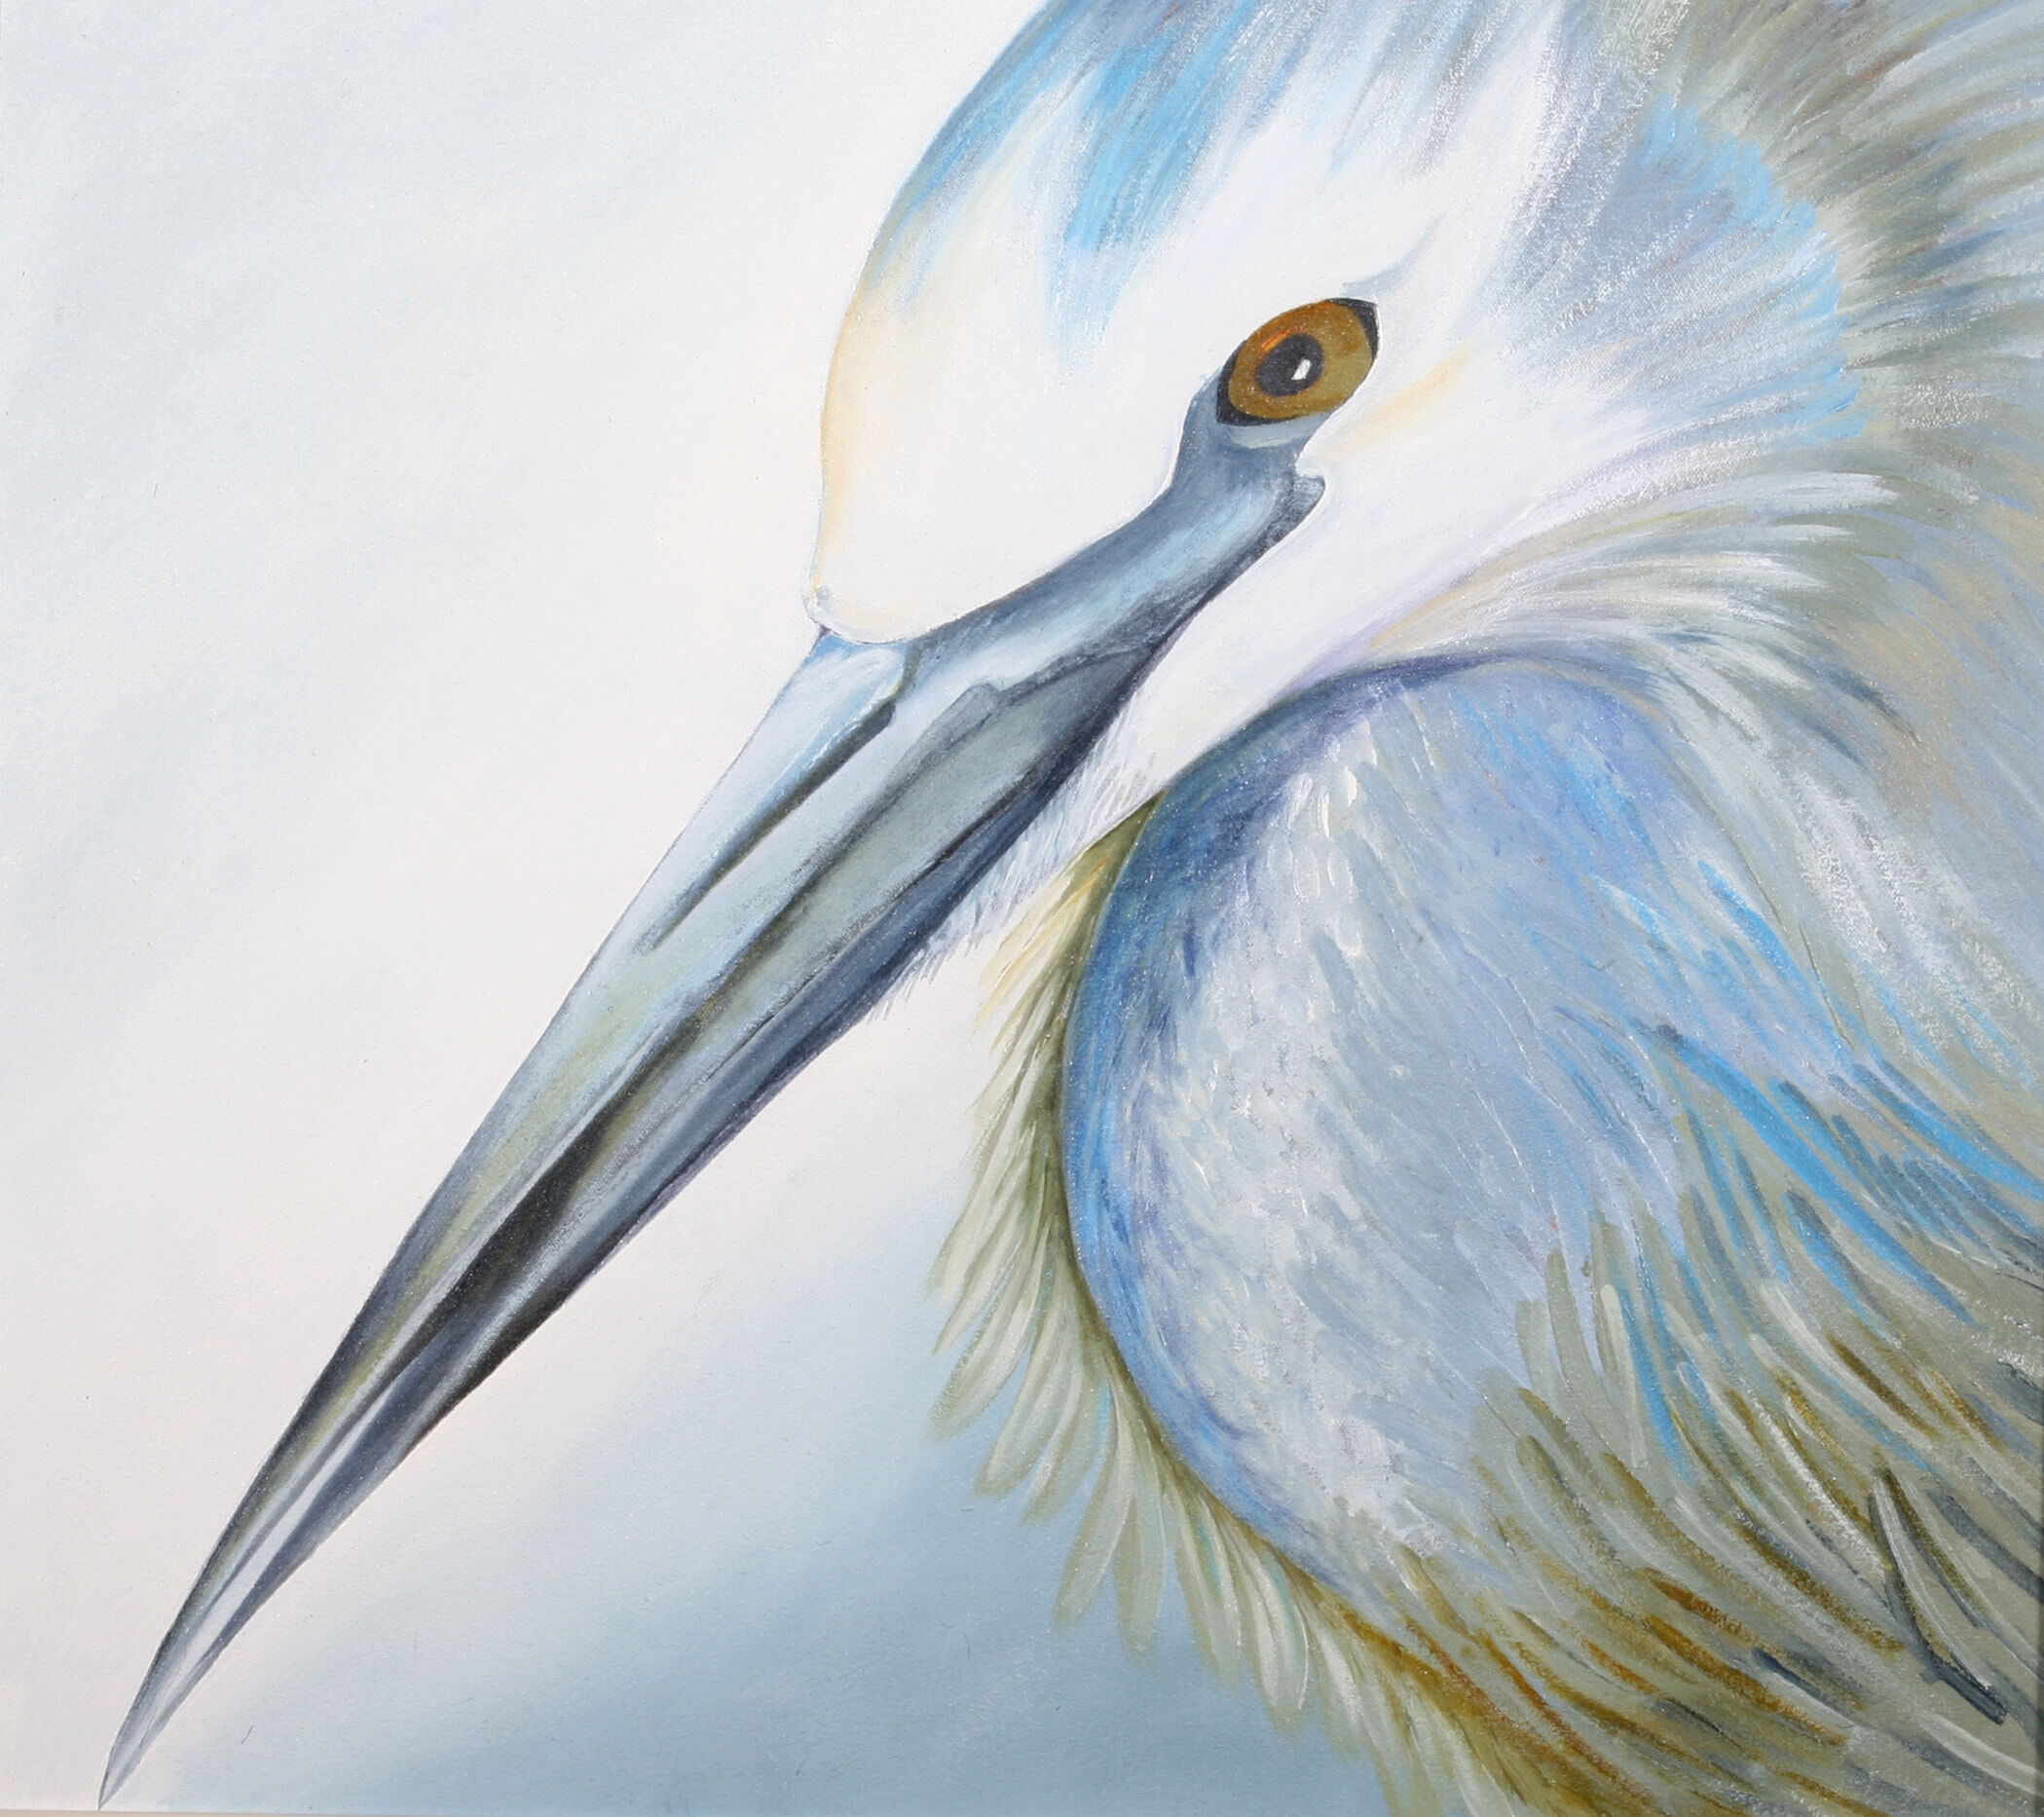 26. White Faced Heron - DESTROYED